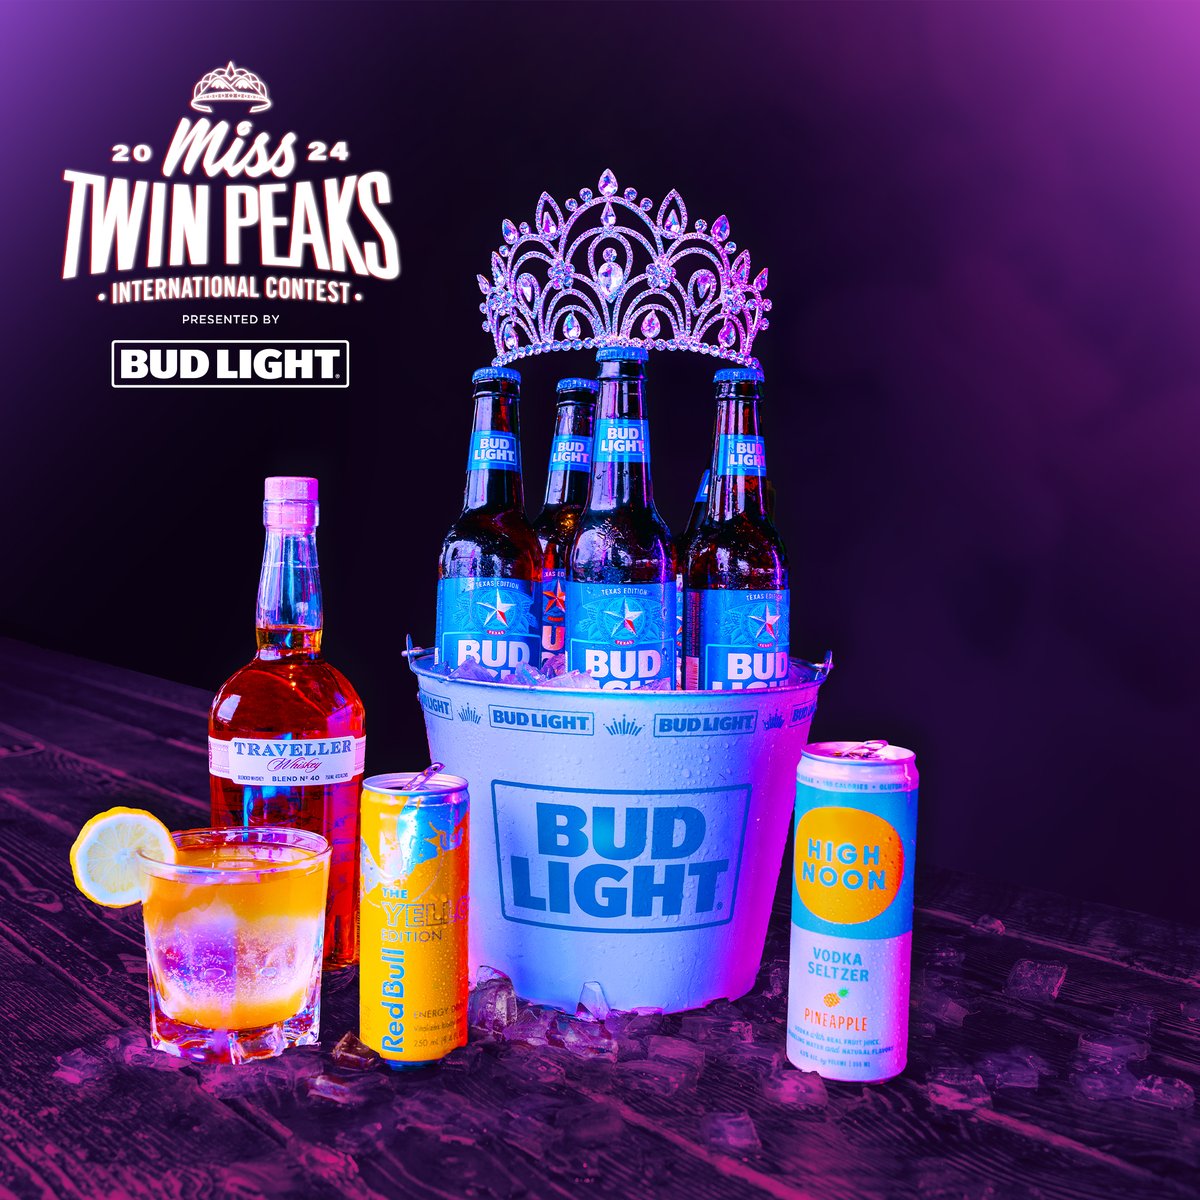 Get in the spirit for Miss Twin Peaks with a bucket of Bud Lights for you and the boys. Or, savor a Traveller Whiskey cocktail while you cast your votes for Miss Popular.
#twinpeaksrestaurants #twinpeaksgirls #mtp #misstwinpeaks #budlight #highnoon #traveller